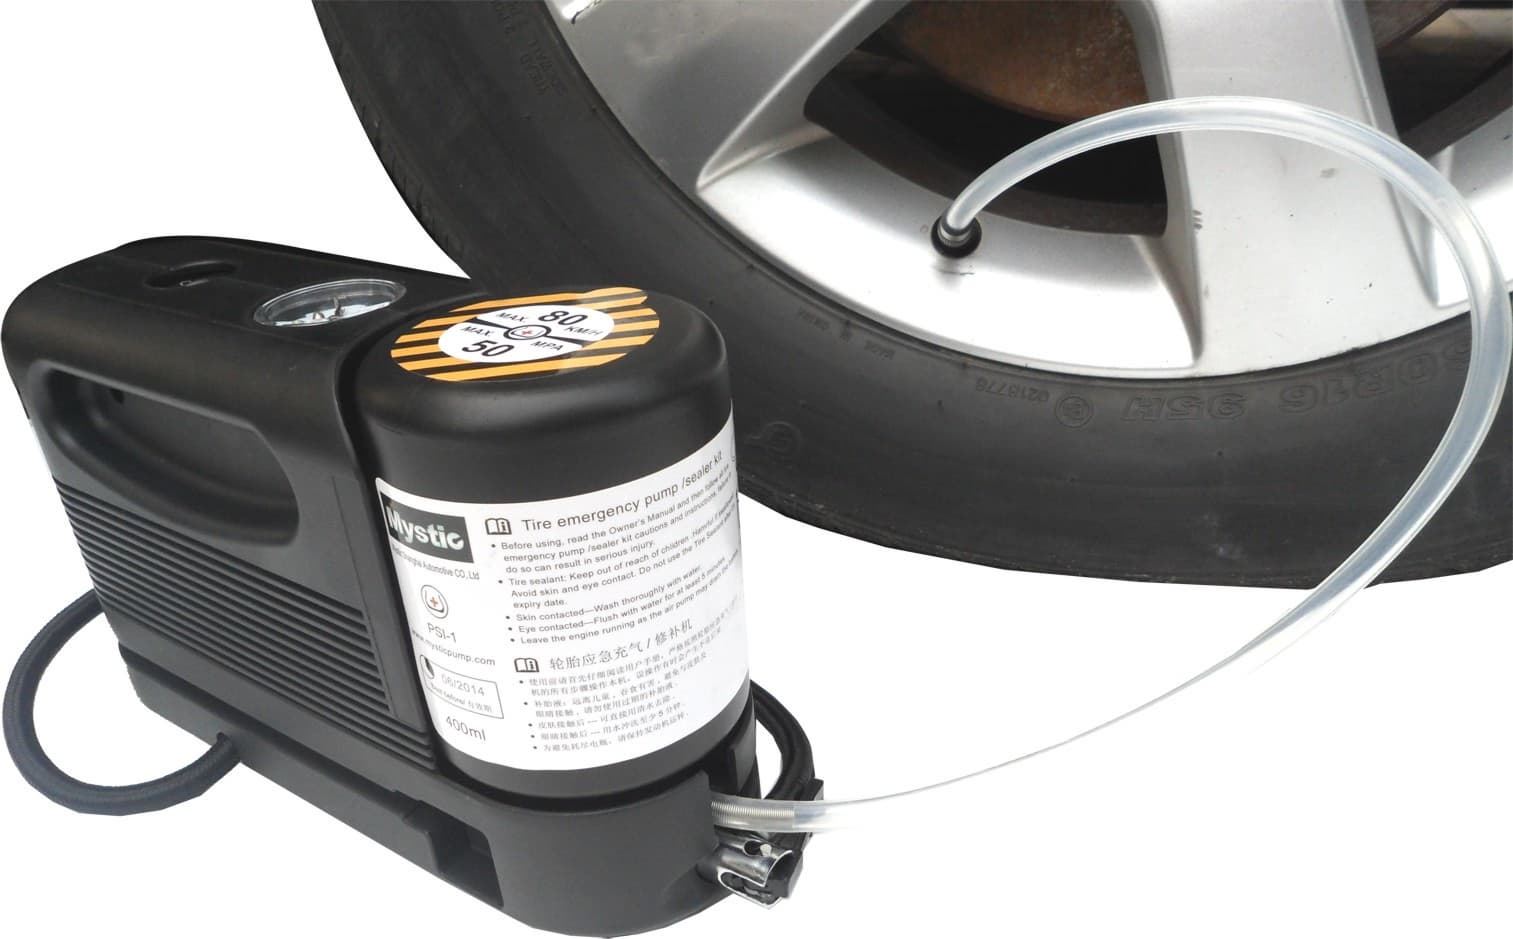 Service Tire Mobility Kit for Fusion Smart Solutions for Tire Emergencies